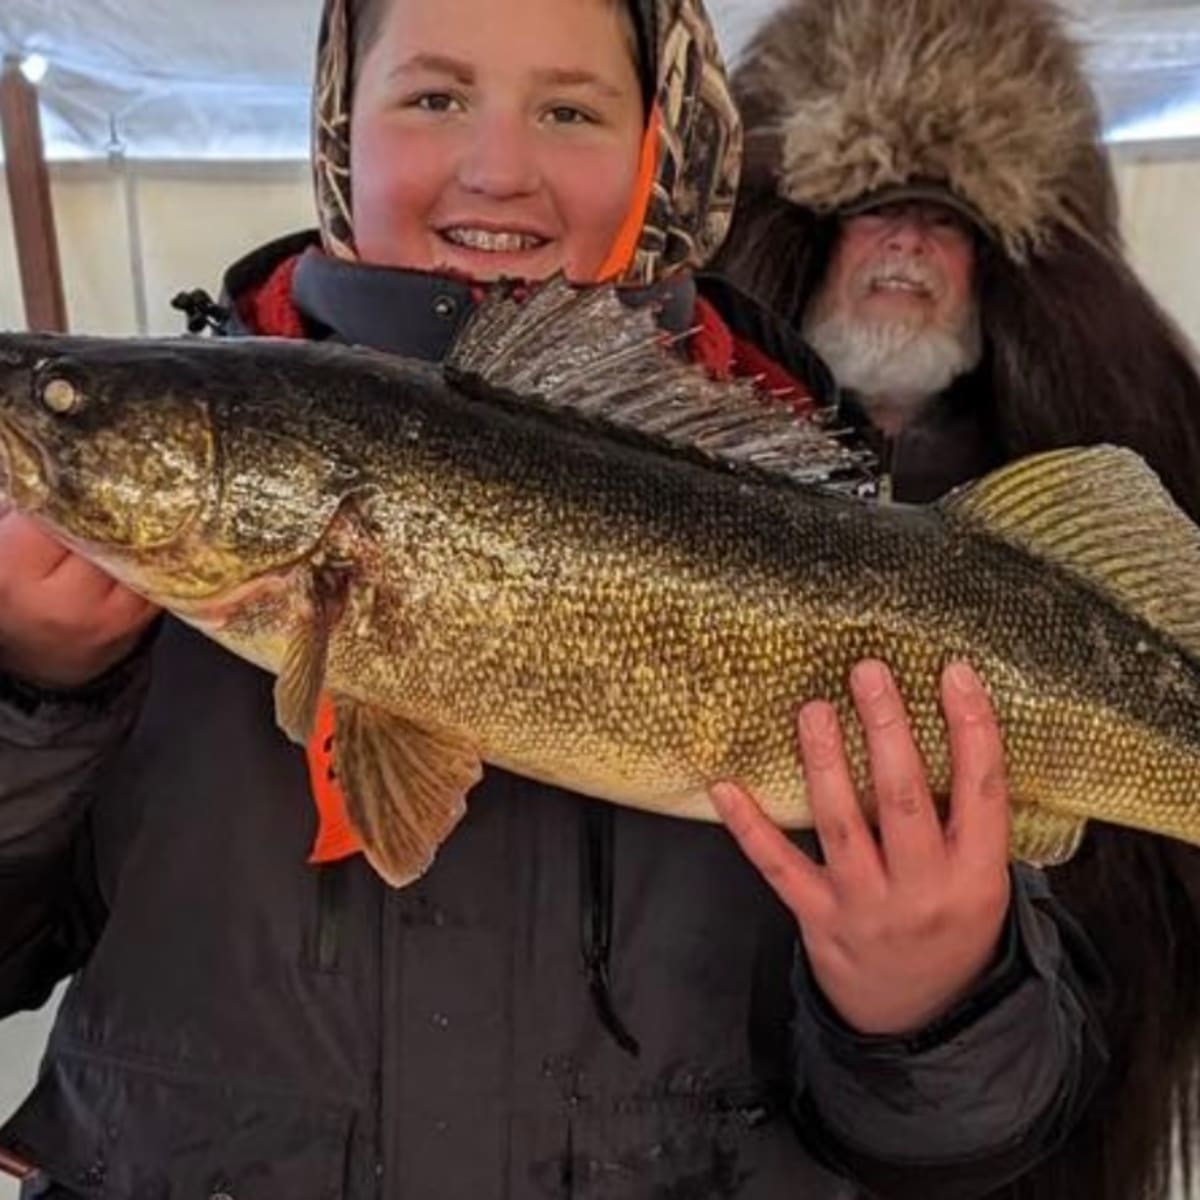 Angler, 13, reels in nearly 10 lb walleye, wins new truck at